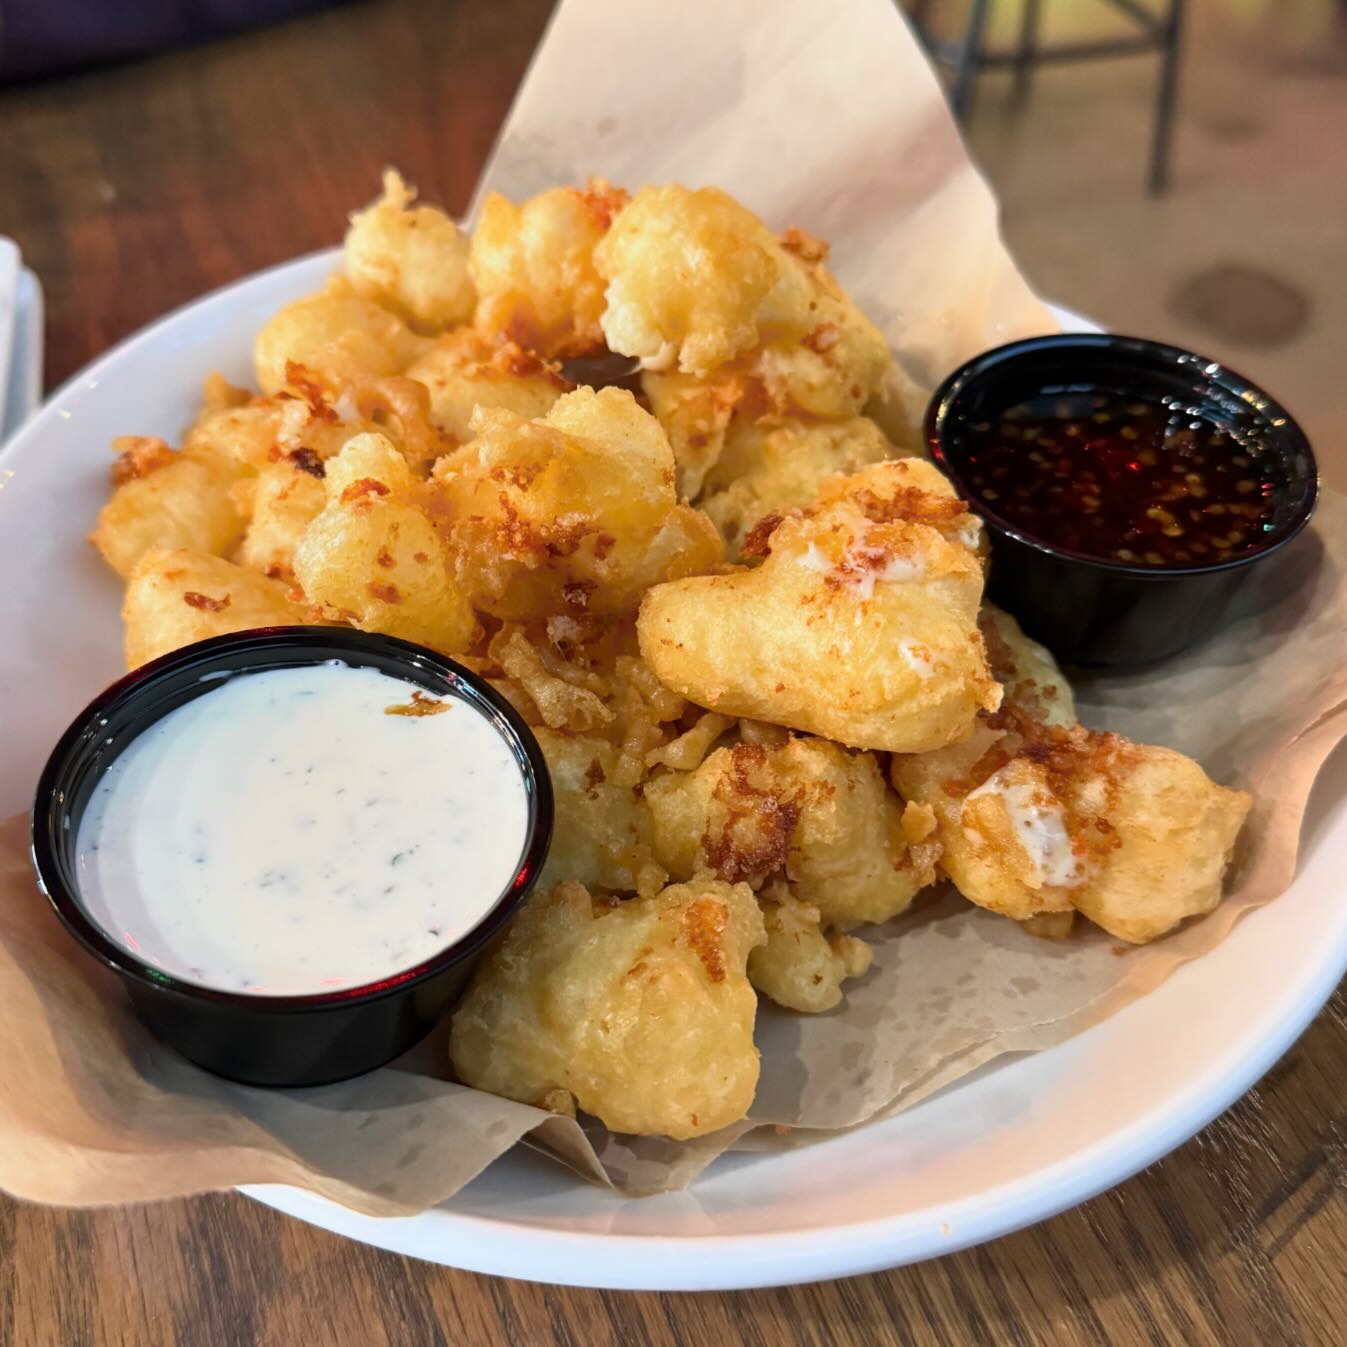 Cider-battered cheese curds 🧀